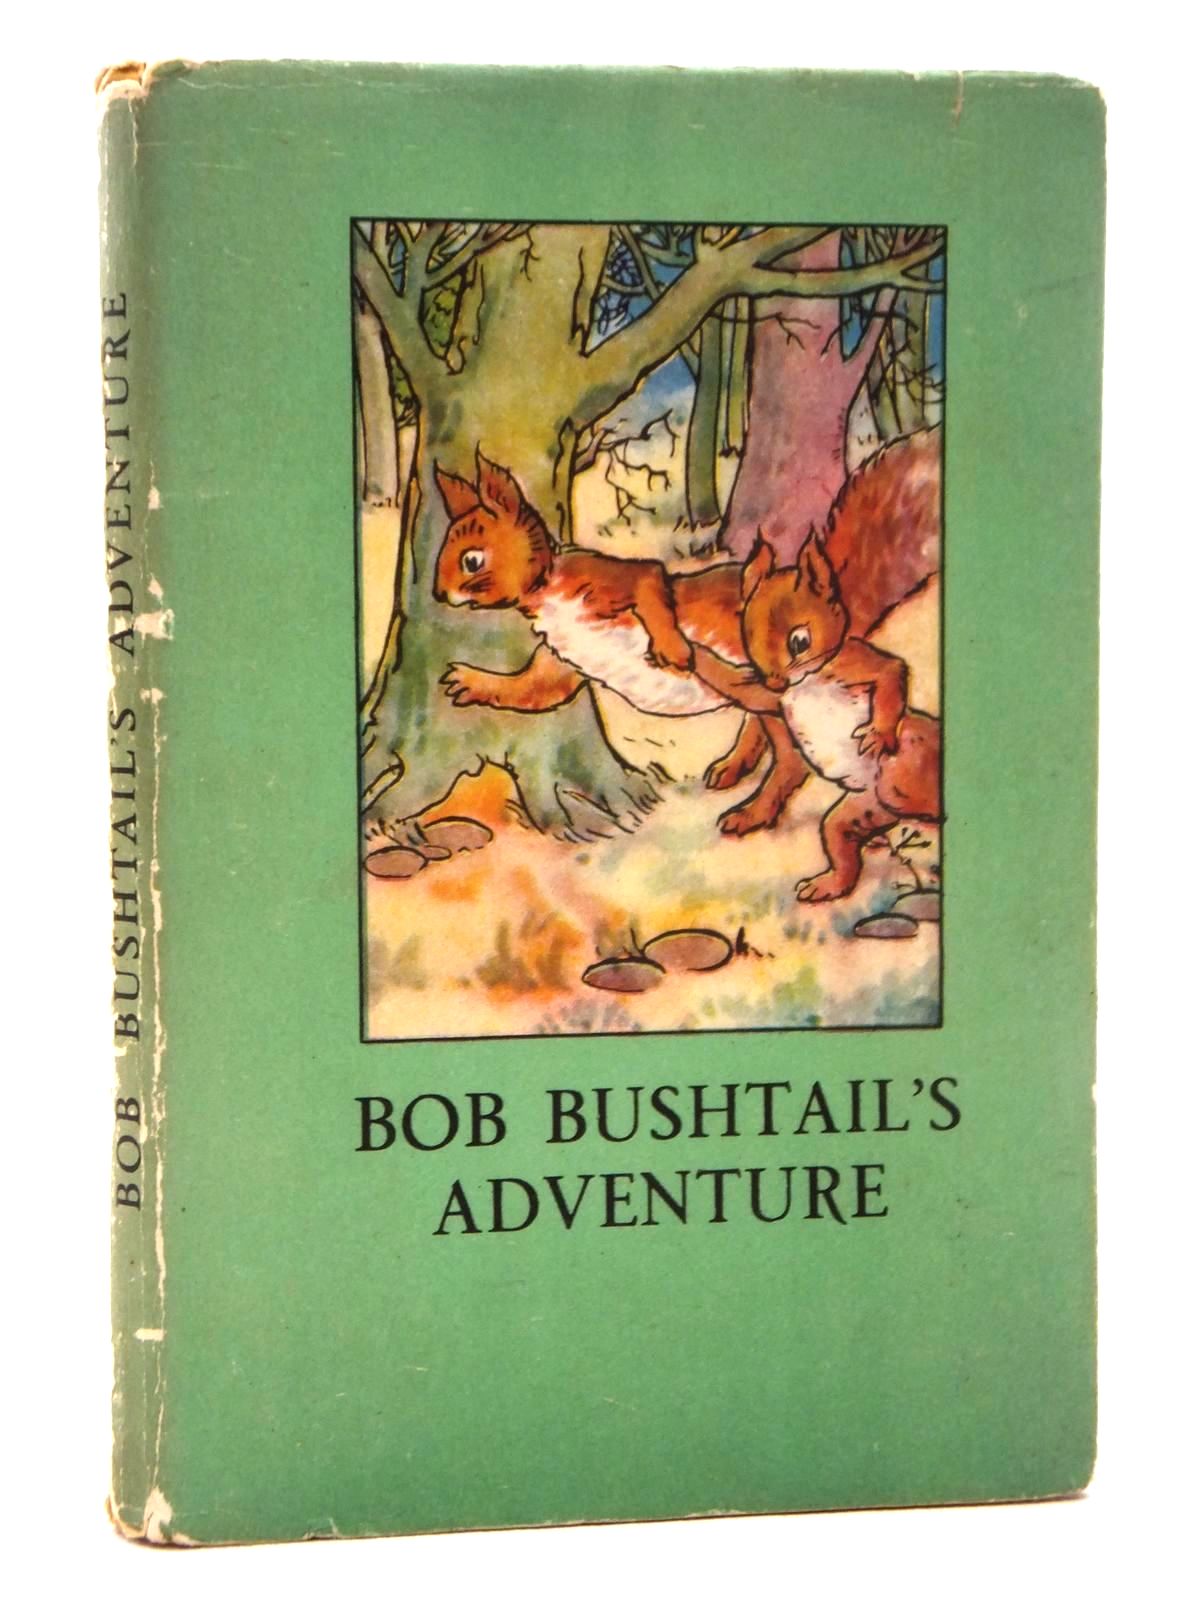 Photo of BOB BUSHTAIL'S ADVENTURE written by Macgregor, A.J. Perring, W. illustrated by Macgregor, A.J. published by Wills &amp; Hepworth Ltd. (STOCK CODE: 2123808)  for sale by Stella & Rose's Books